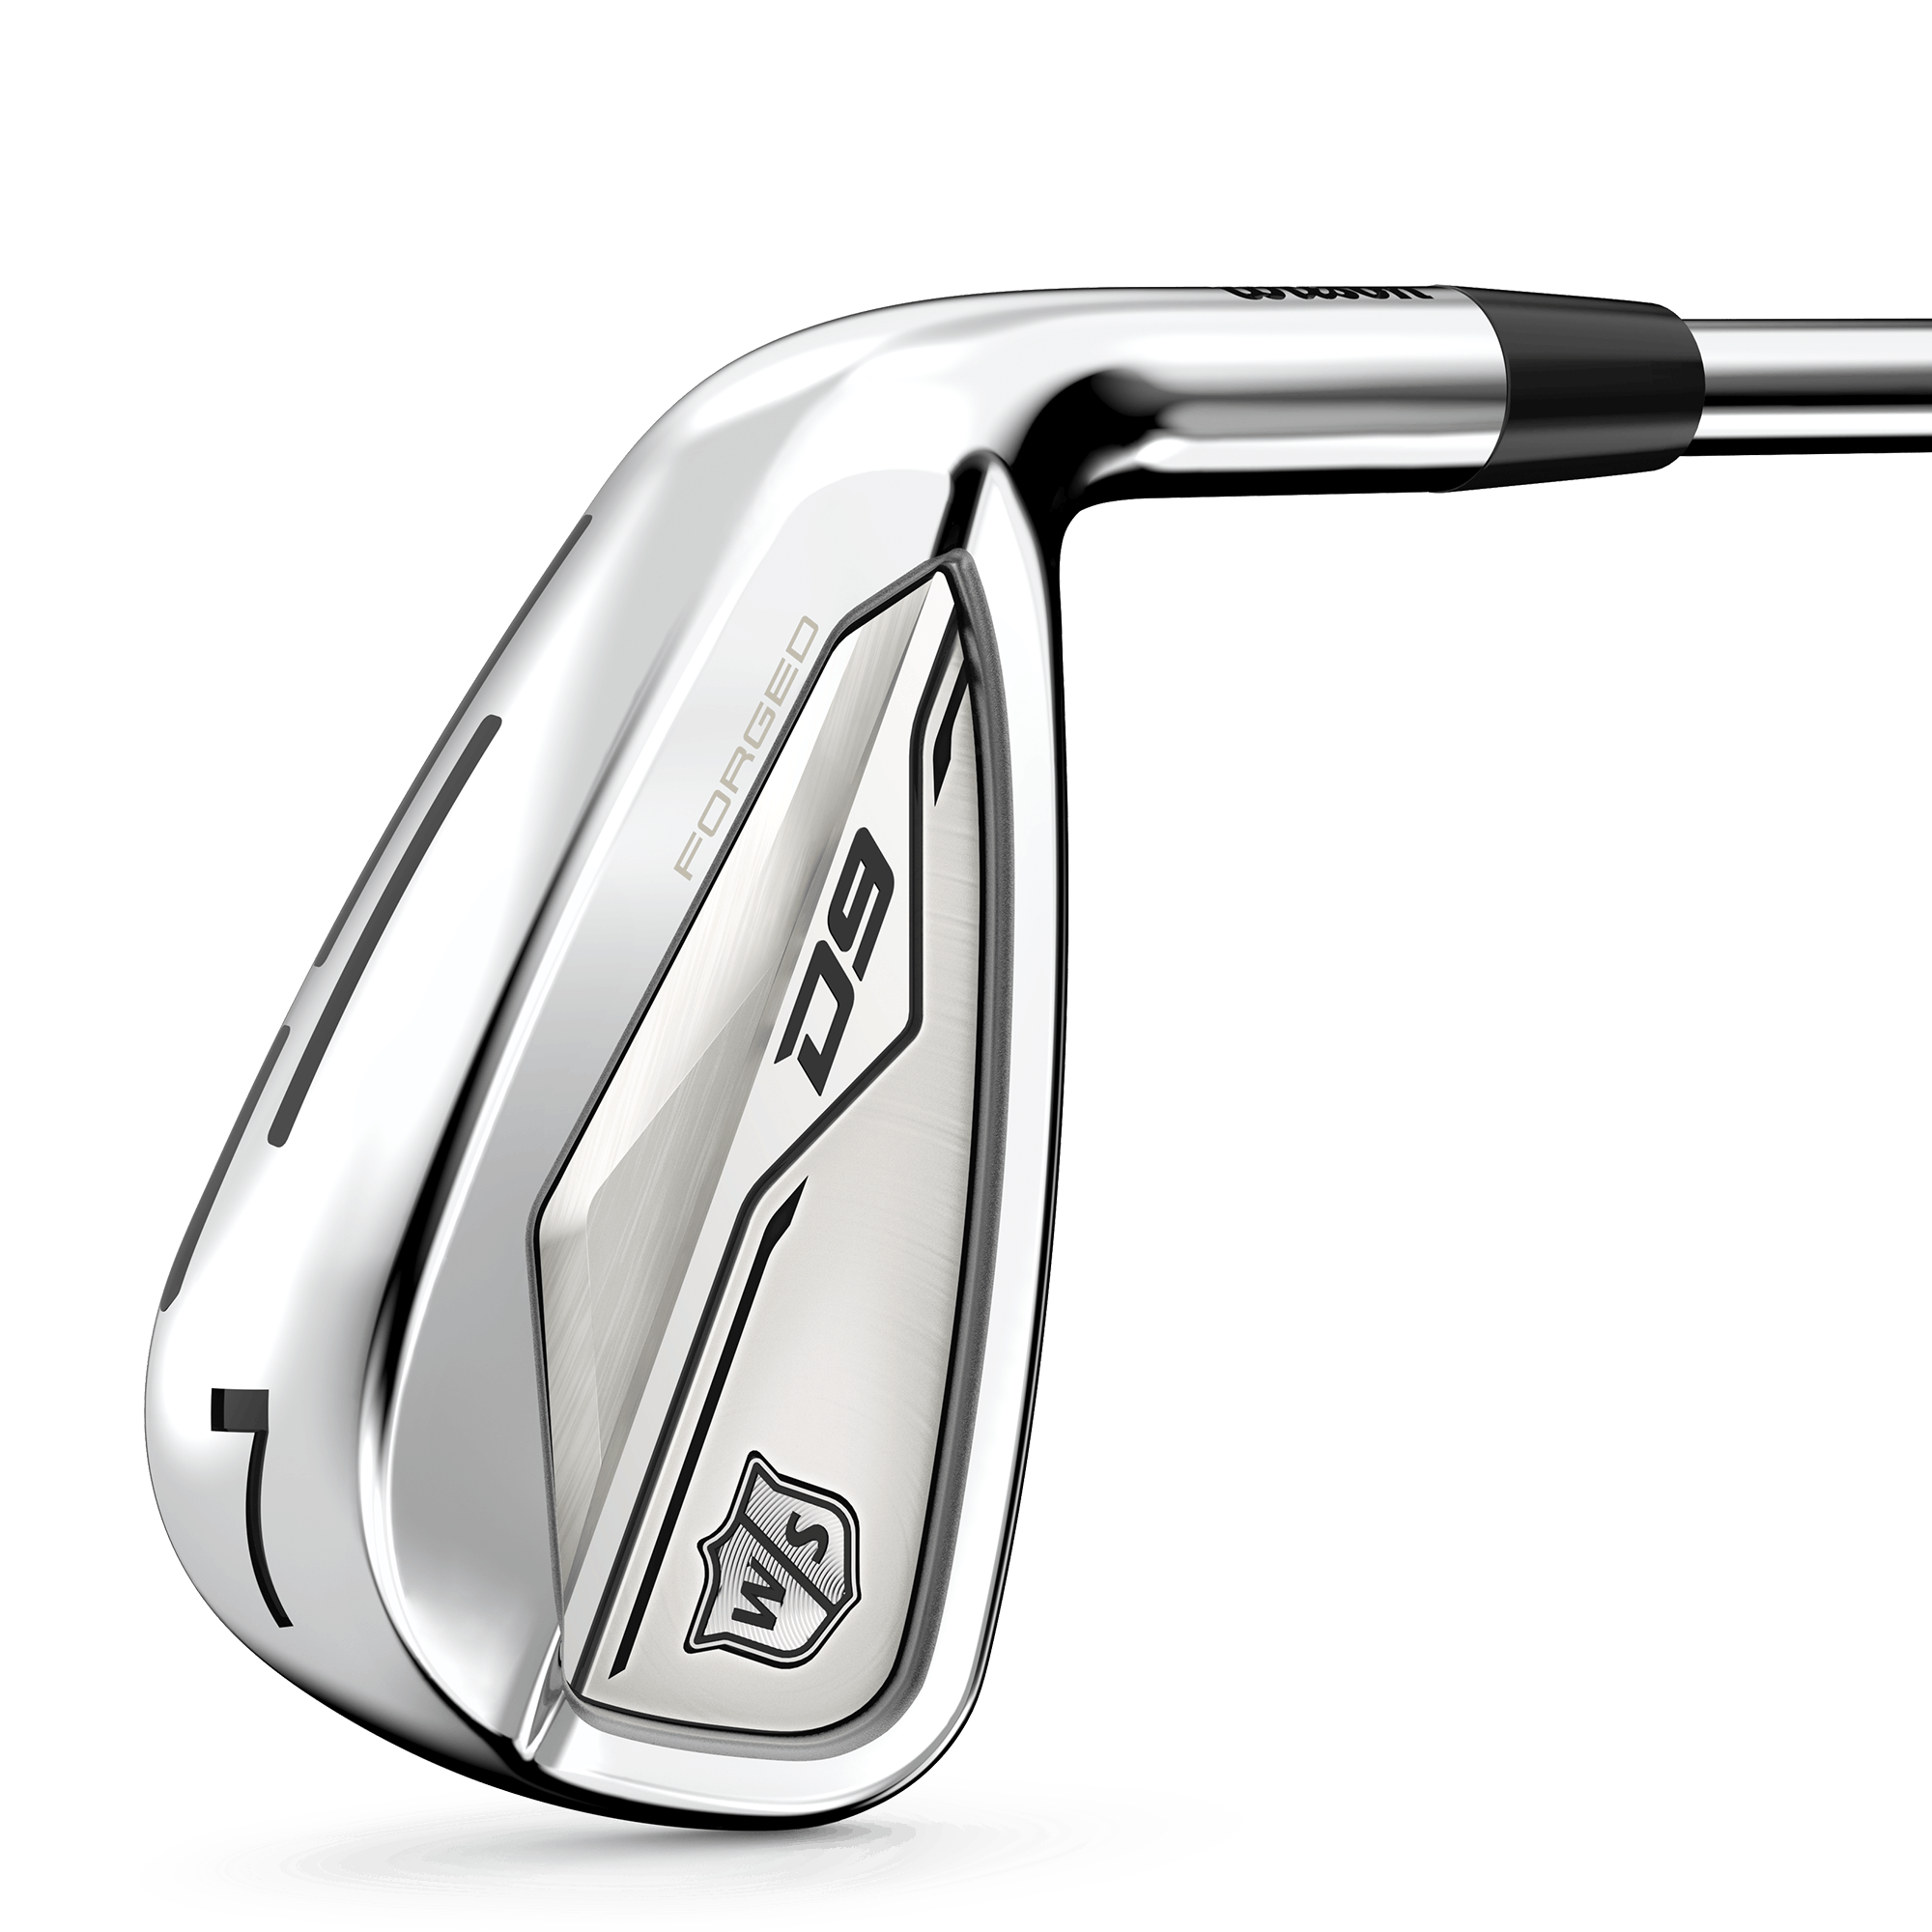 Wilson D9 Forged Irons · Right handed · Steel · Regular · 4-PW